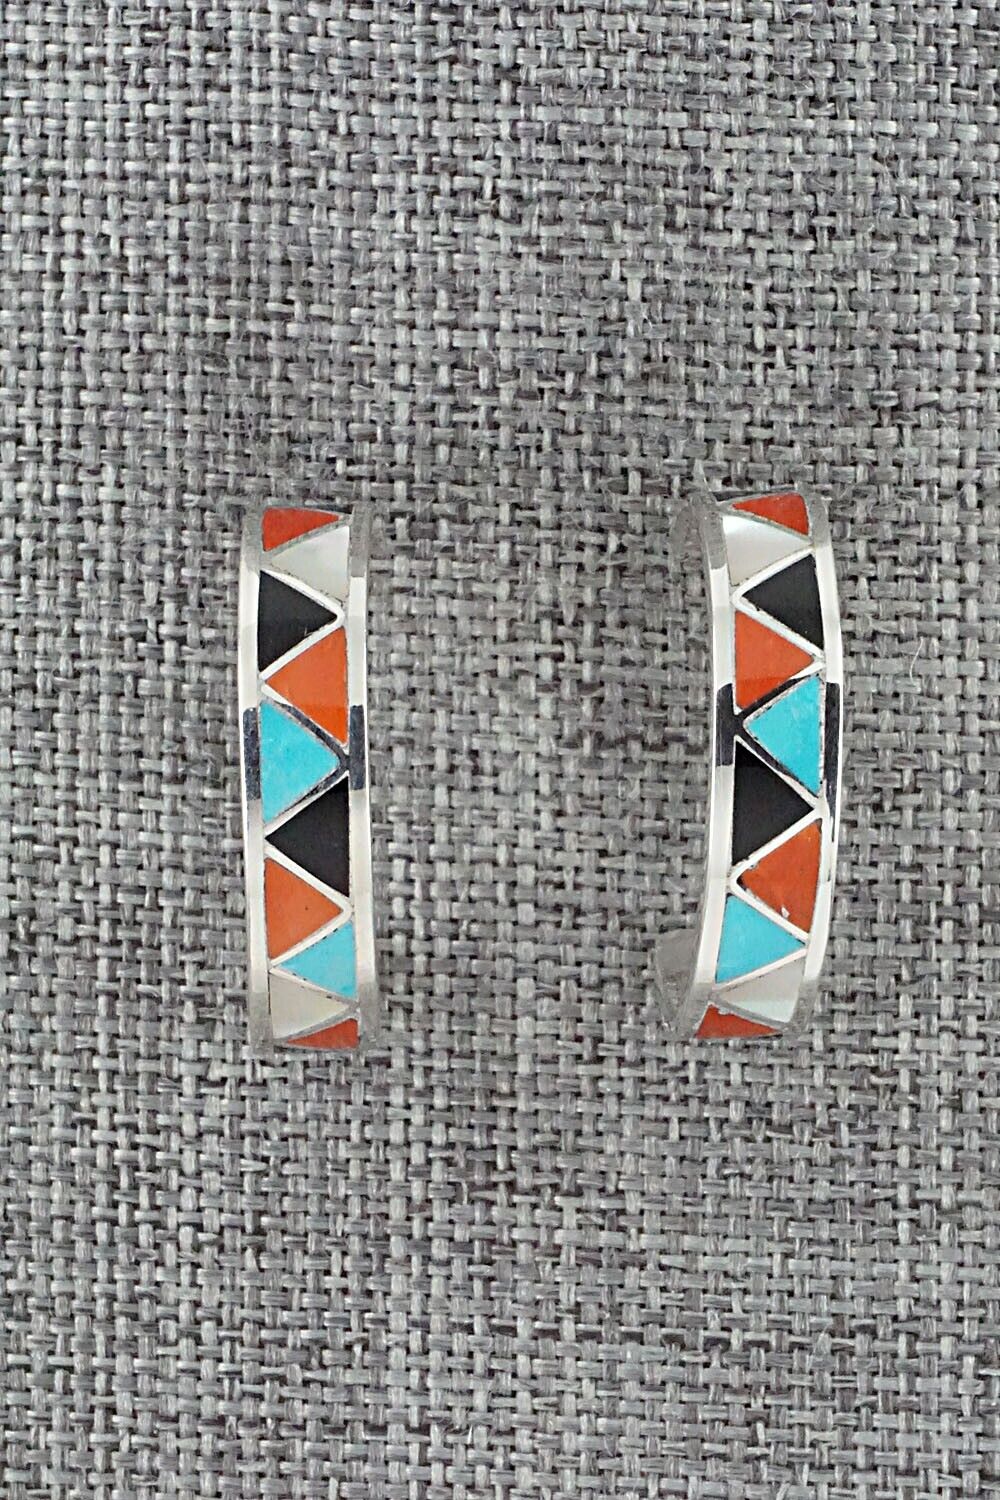 Multi-Stone & Sterling Silver Inlay Earrings - Claudine Haloo